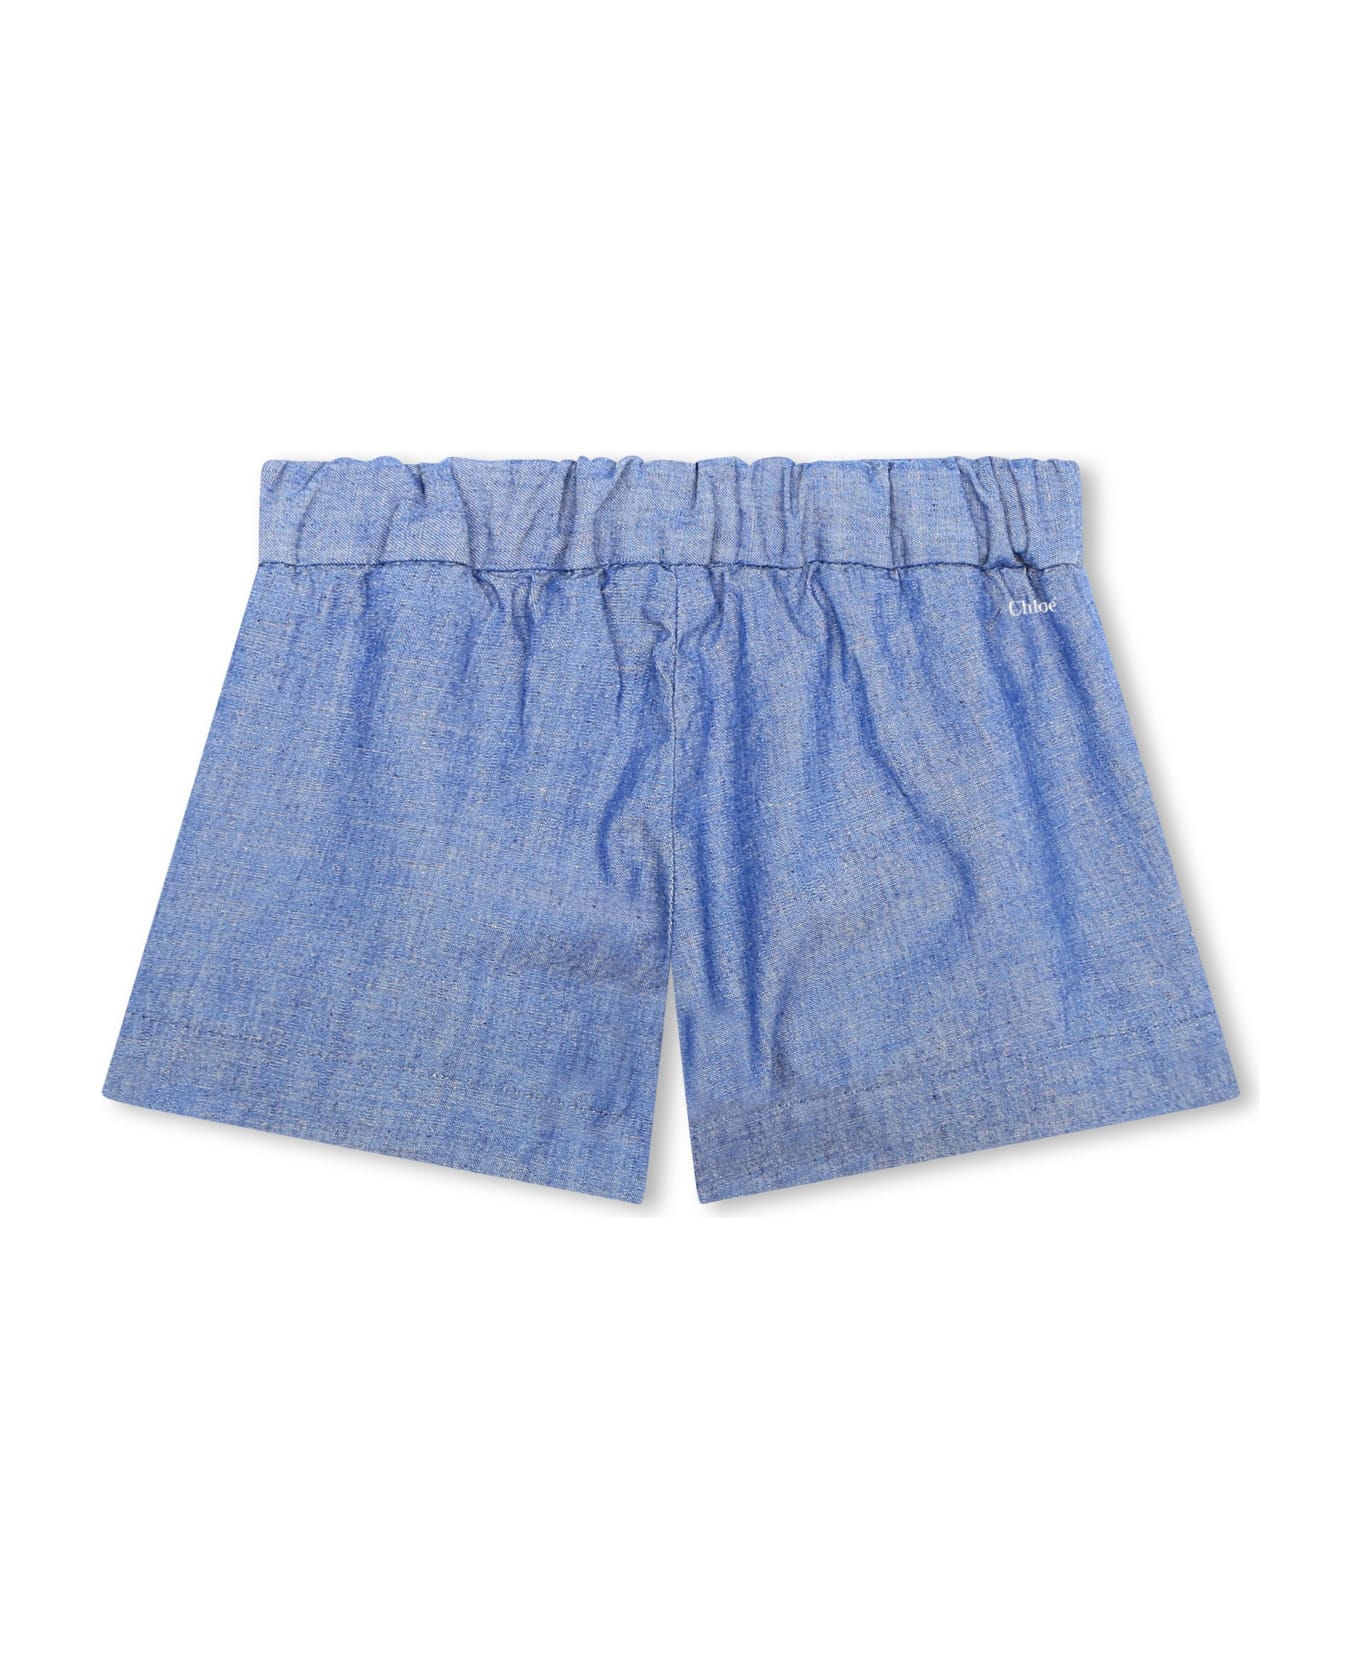 Chloé Shorts With Embroidery - Blue ボトムス